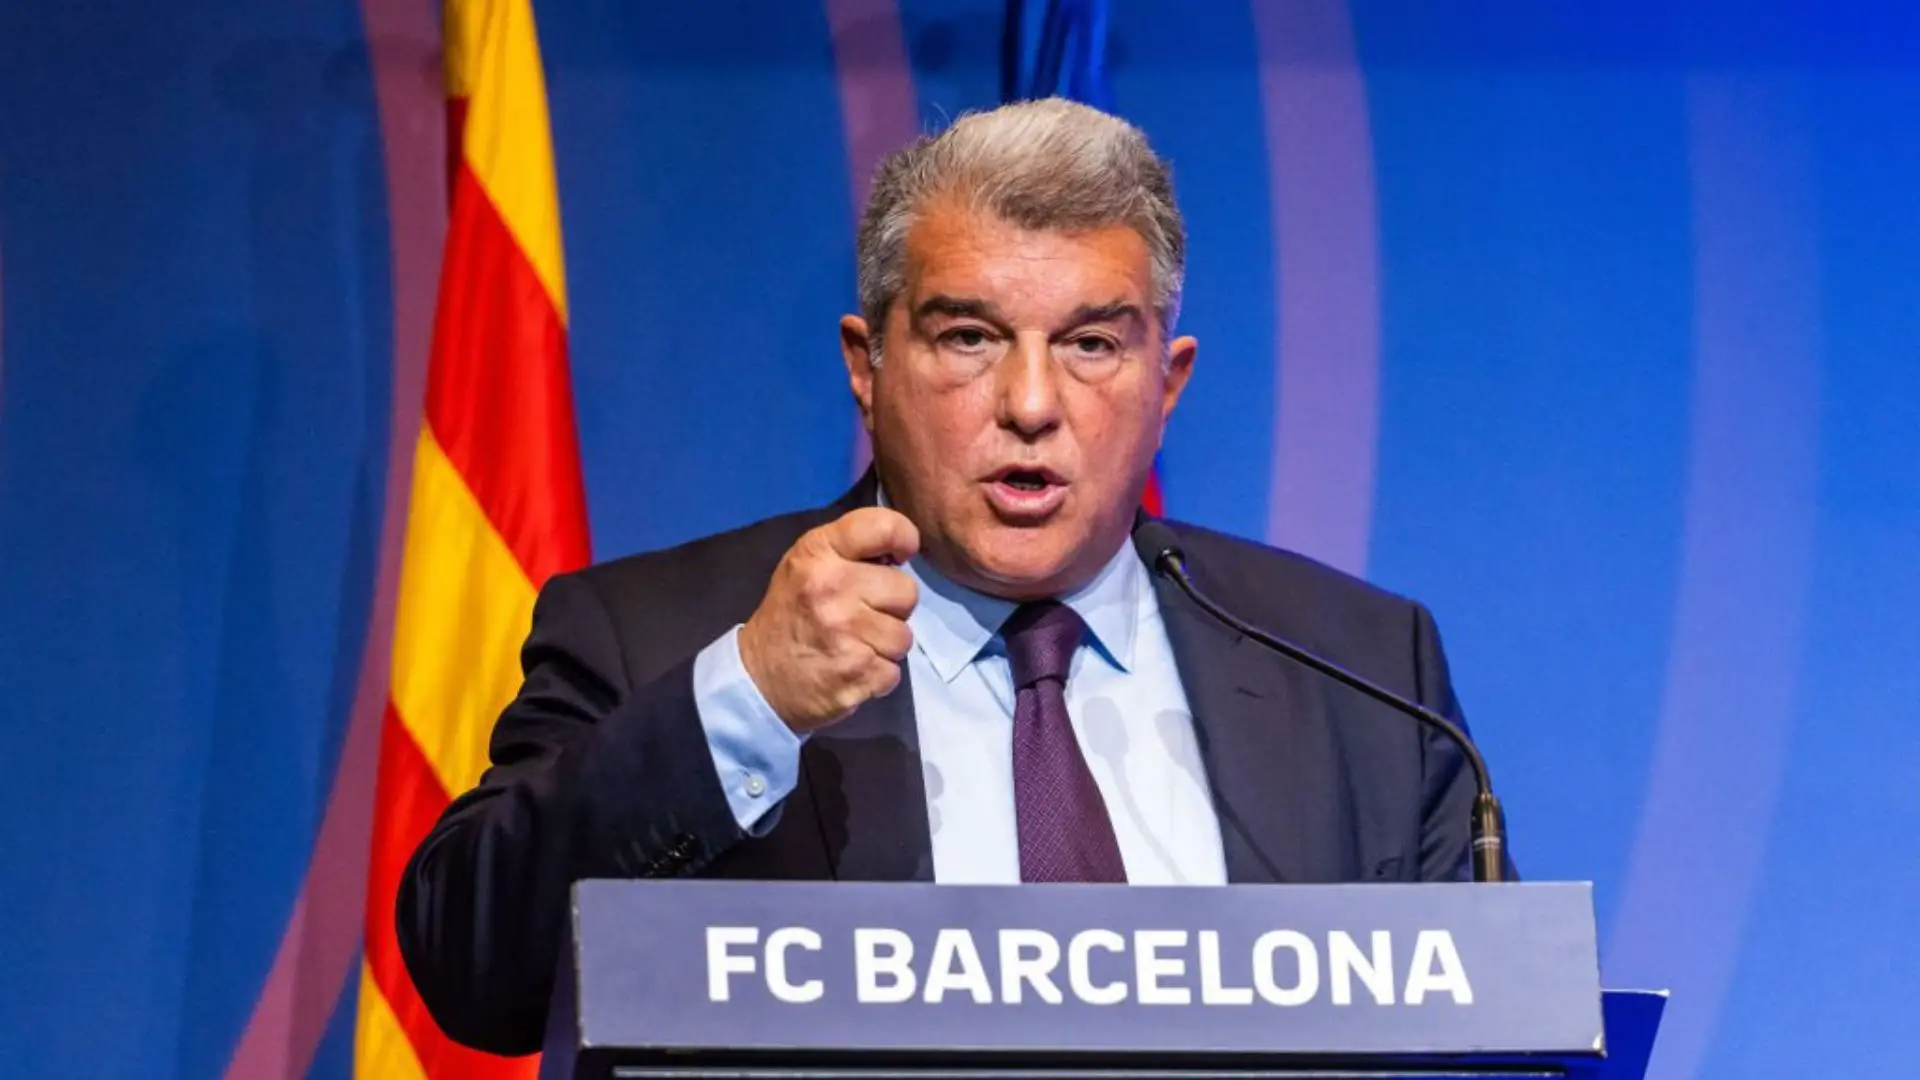 Barcelona President Laporta Confirms Club Will Play in Next Champions League